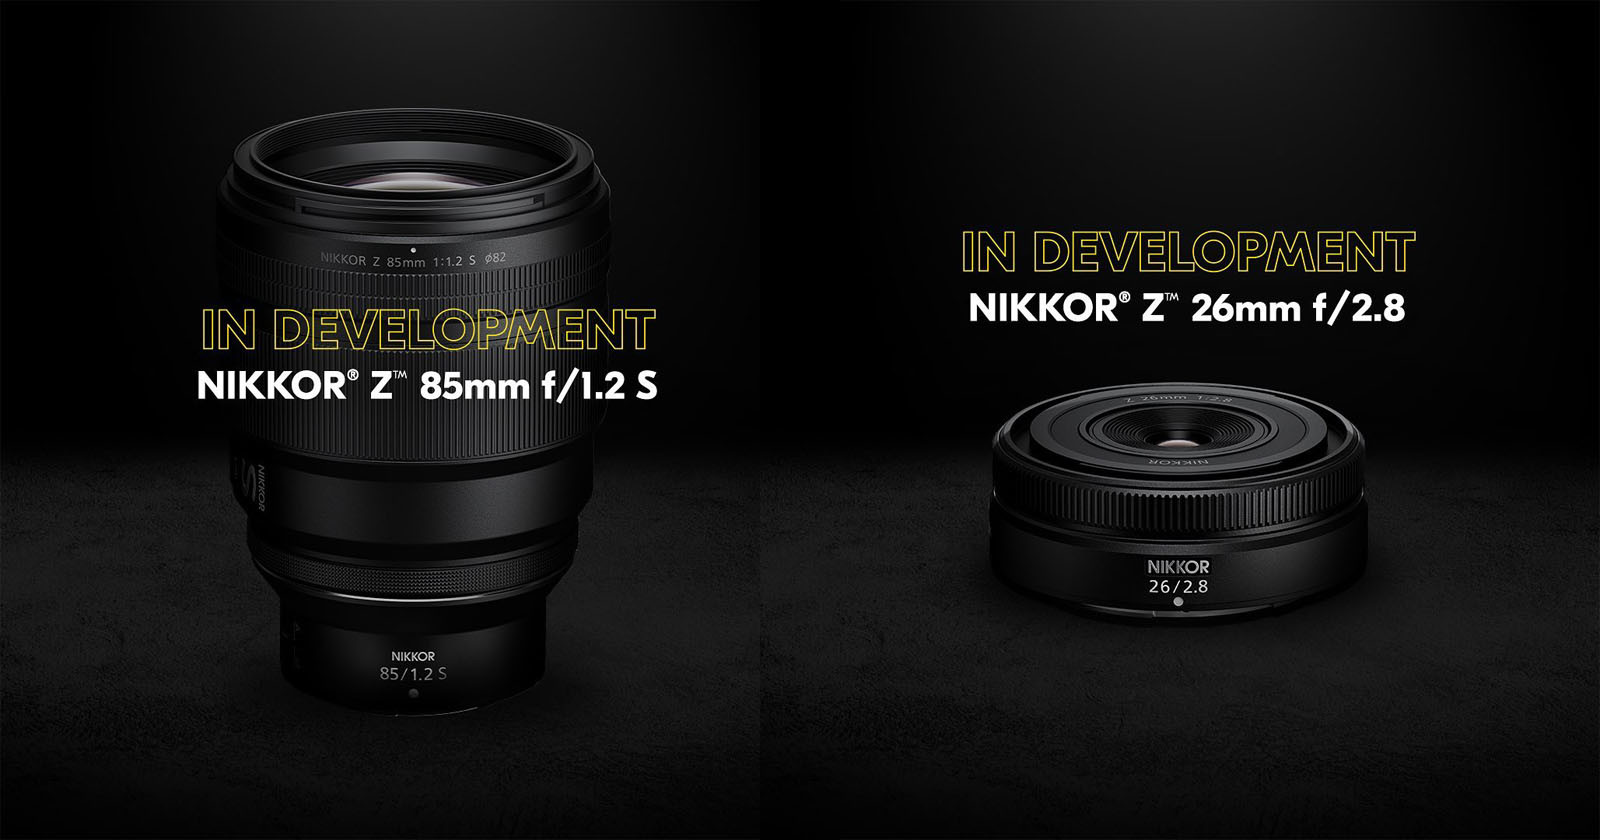 Nikon is Developing Two New Z-Mount Lenses: 85mm f/1.2 S and 26mm f/2.8